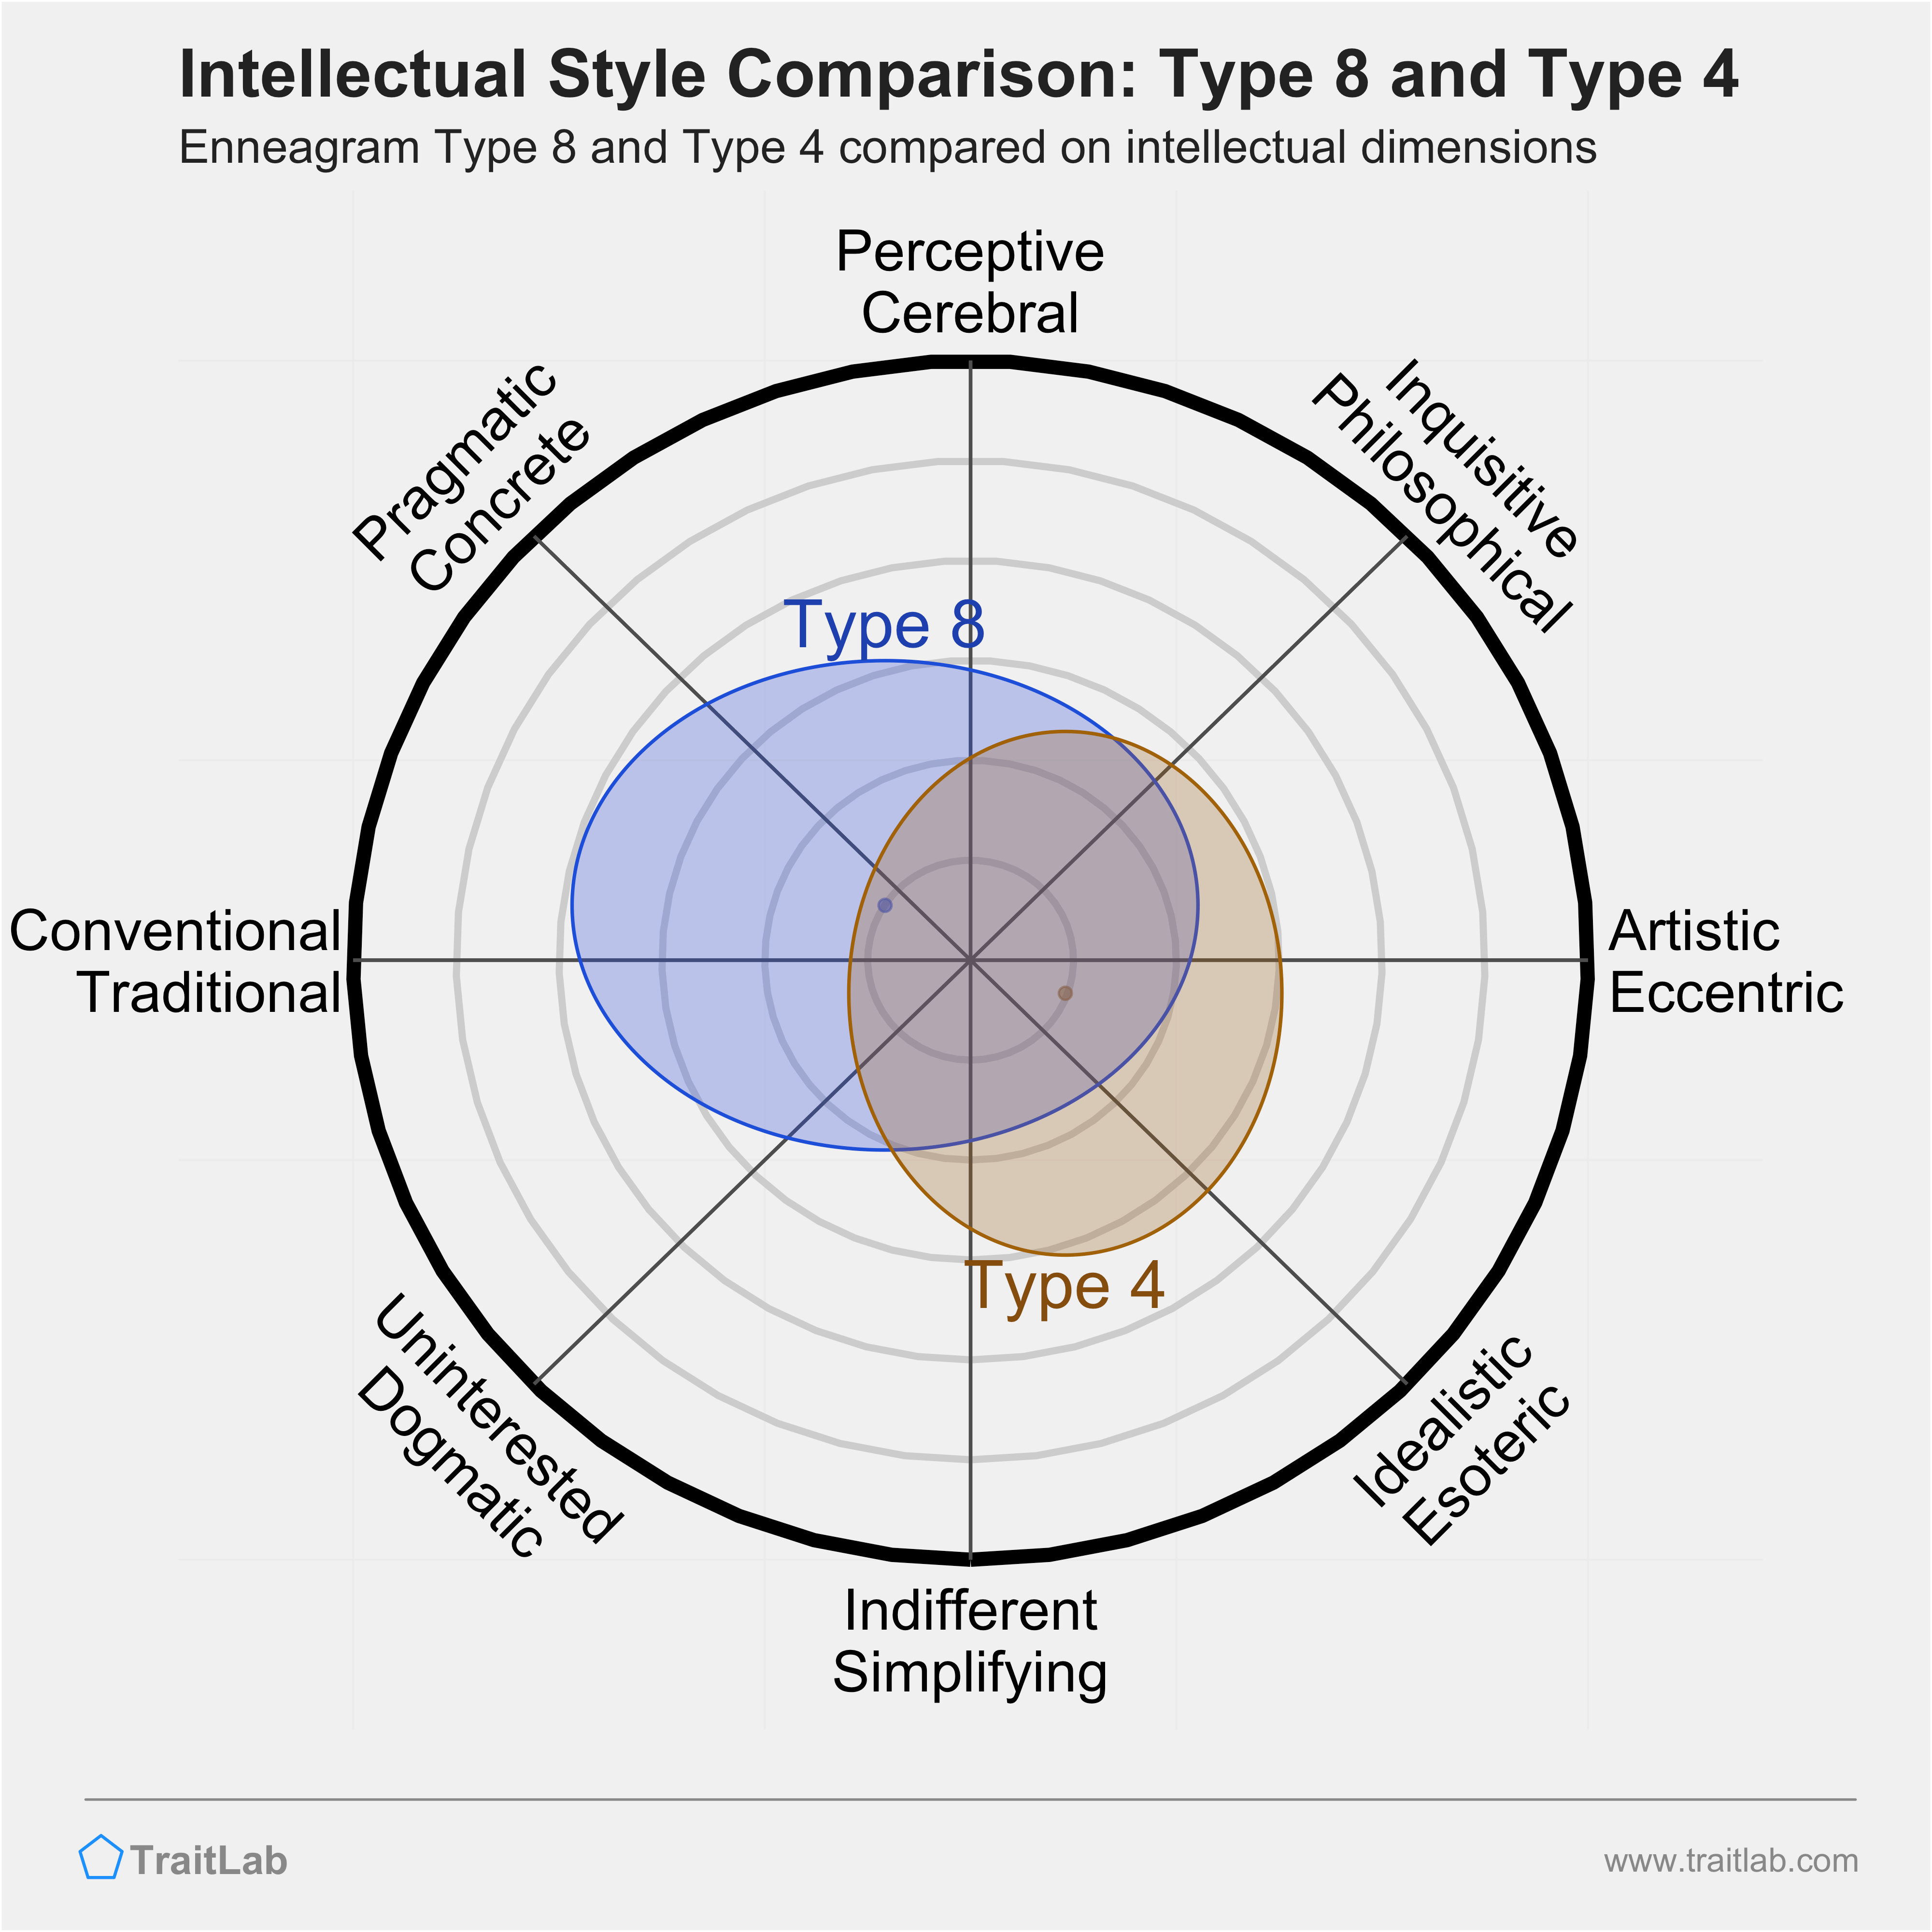 Type 8 and Type 4 comparison across intellectual dimensions